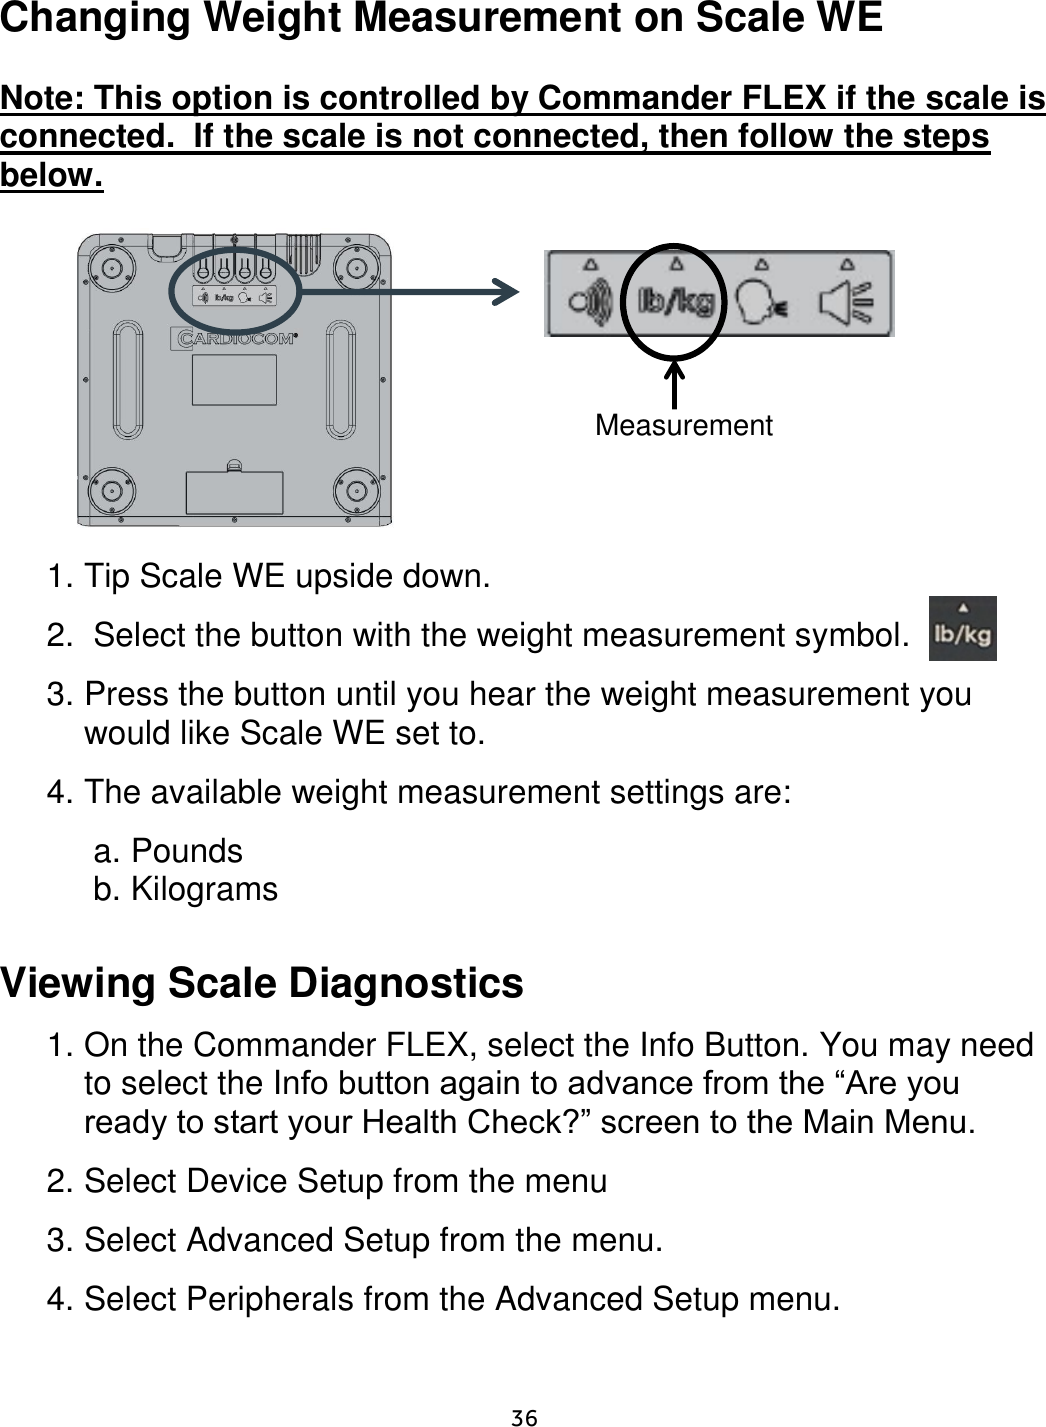     36  Changing Weight Measurement on Scale WE  Note: This option is controlled by Commander FLEX if the scale is connected.  If the scale is not connected, then follow the steps below.                 1. Tip Scale WE upside down.   2.  Select the button with the weight measurement symbol. 3. Press the button until you hear the weight measurement you would like Scale WE set to. 4. The available weight measurement settings are:  a. Pounds b. Kilograms  Viewing Scale Diagnostics  1. On the Commander FLEX, select the Info Button. You may need to select the Info button again to advance from the “Are you ready to start your Health Check?” screen to the Main Menu.  2. Select Device Setup from the menu 3. Select Advanced Setup from the menu. 4. Select Peripherals from the Advanced Setup menu.  Measurement 